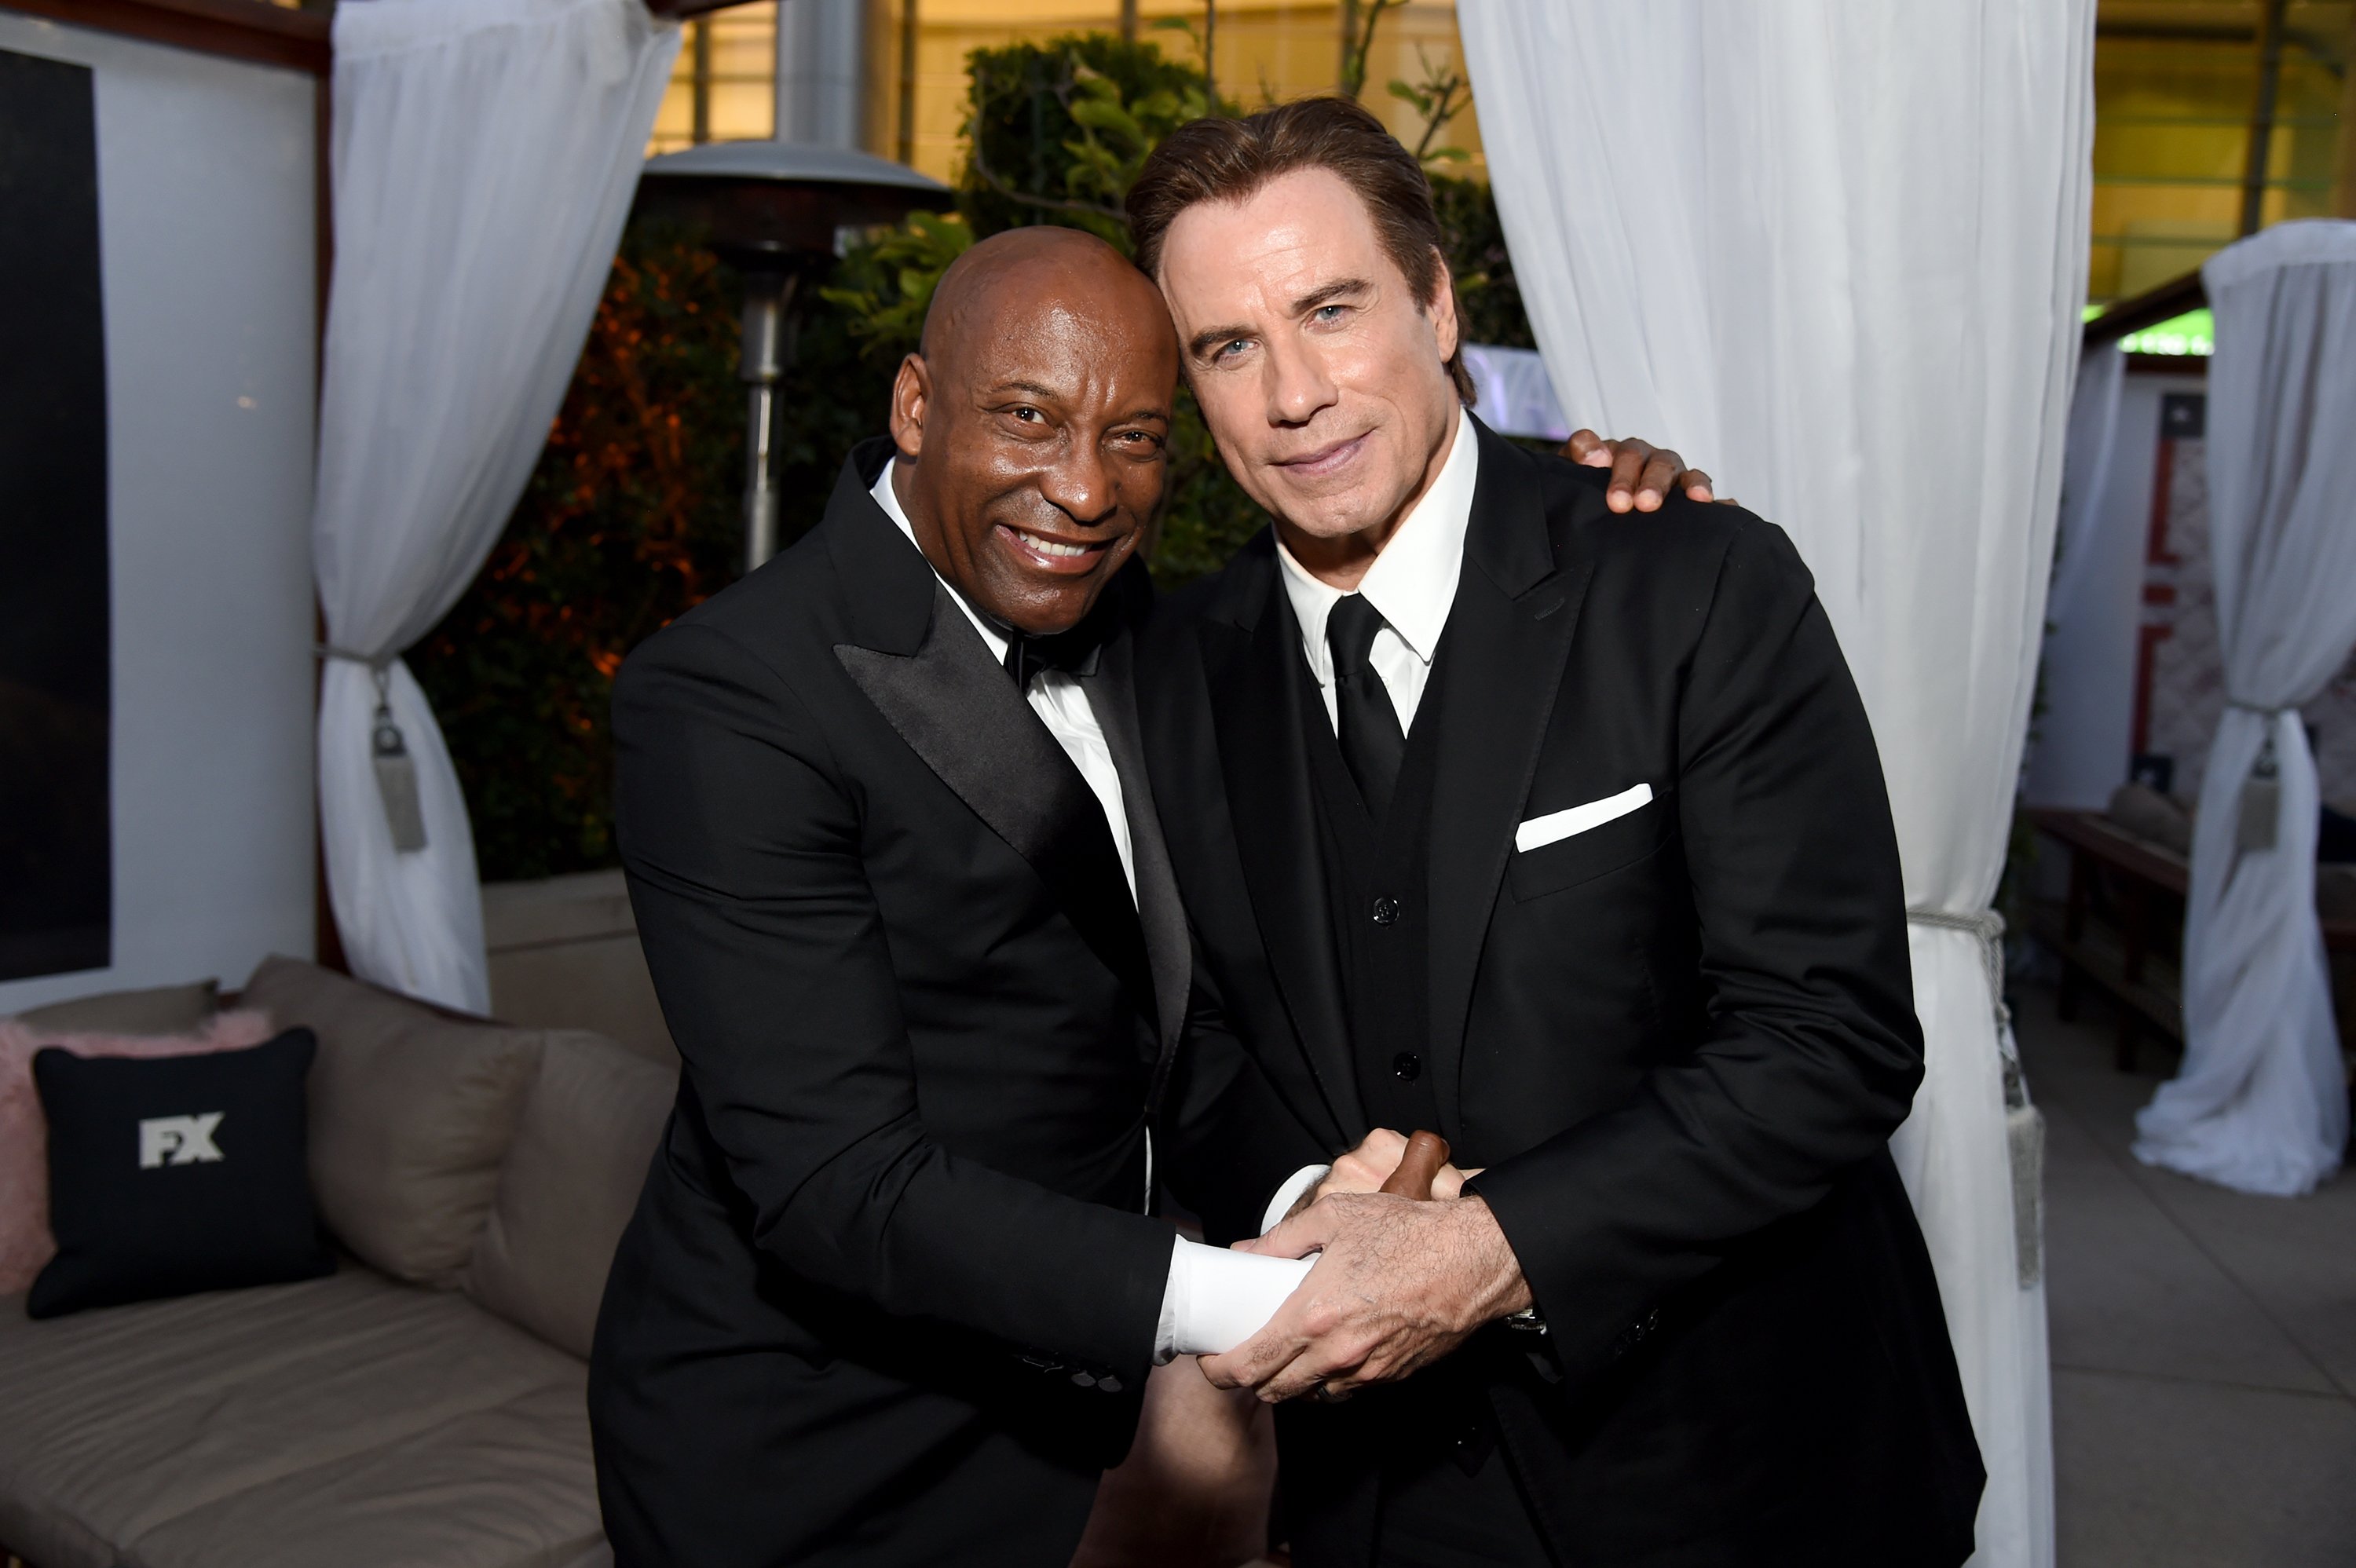 Director John Singleton and actor John Travolta at Vanity Fair And FX's Annual Primetime Emmy Nominations Party in 2016.Photo: Getty Images/GlobalImagesUkraine